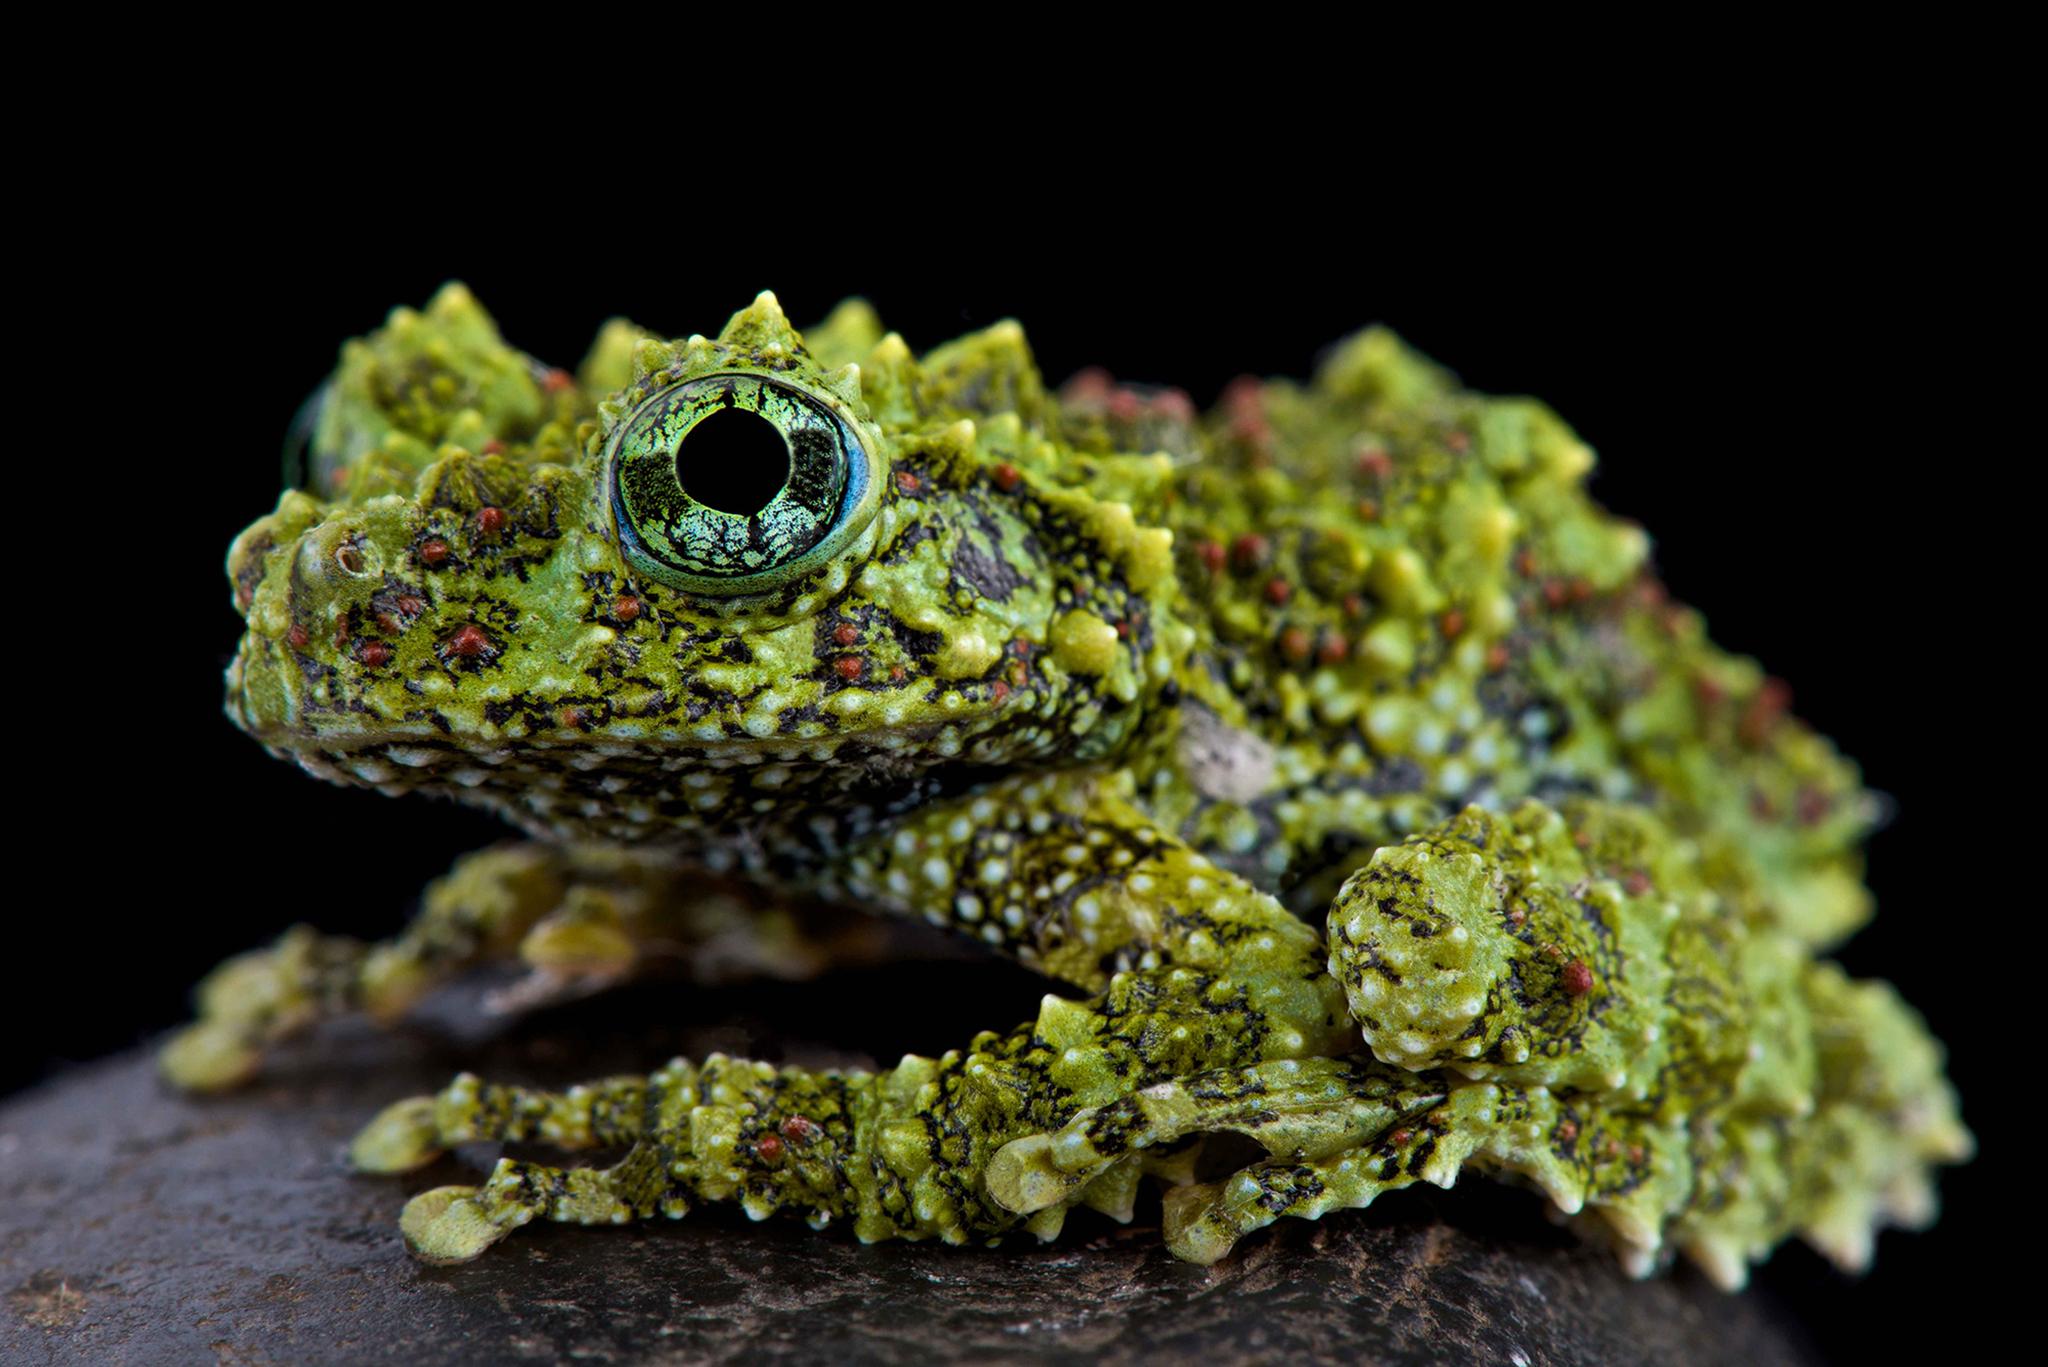 Mossy frog